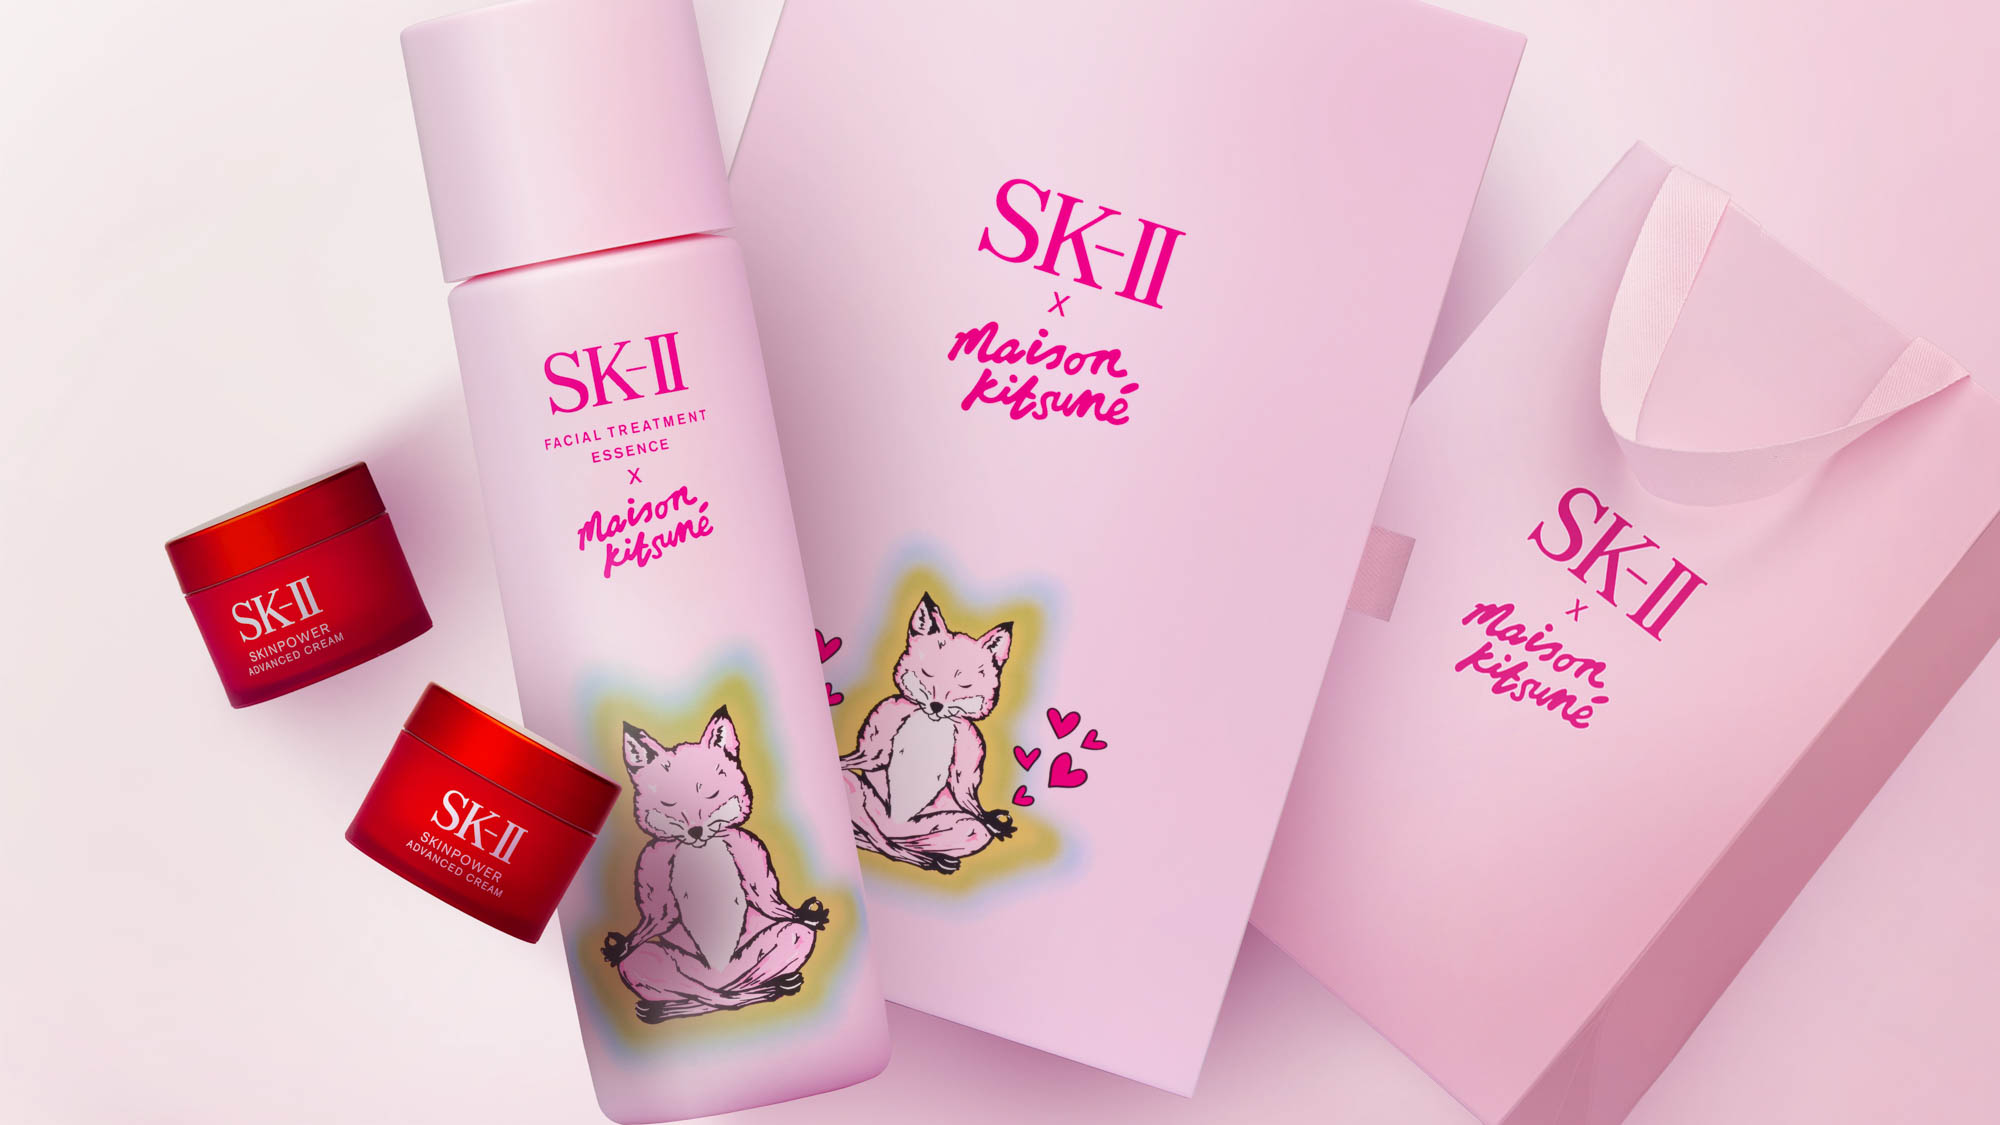 SK-II-Cosmetic-photography-product-maison-kitusne-coco-creative-studio-valentines day- singapore-france